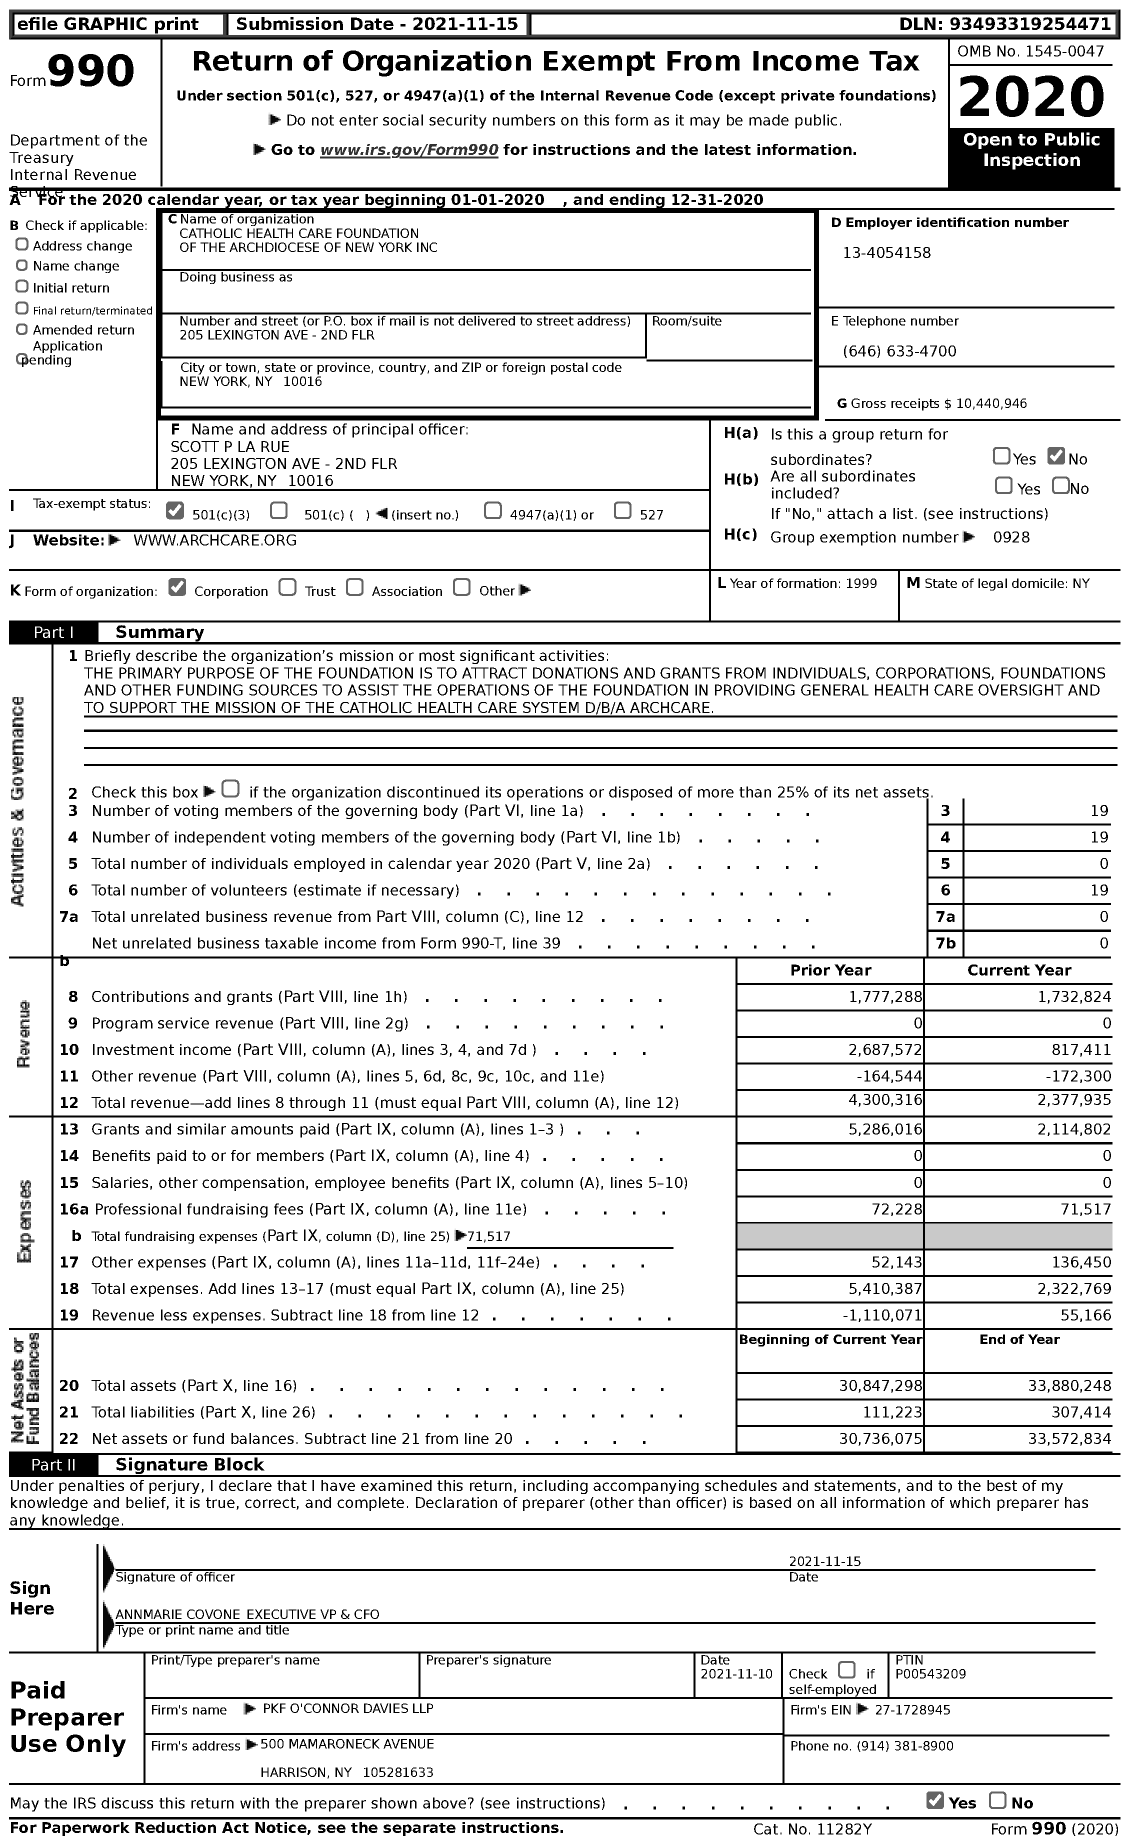 Image of first page of 2020 Form 990 for Catholic Health Care Foundation of the Archdiocese of New York